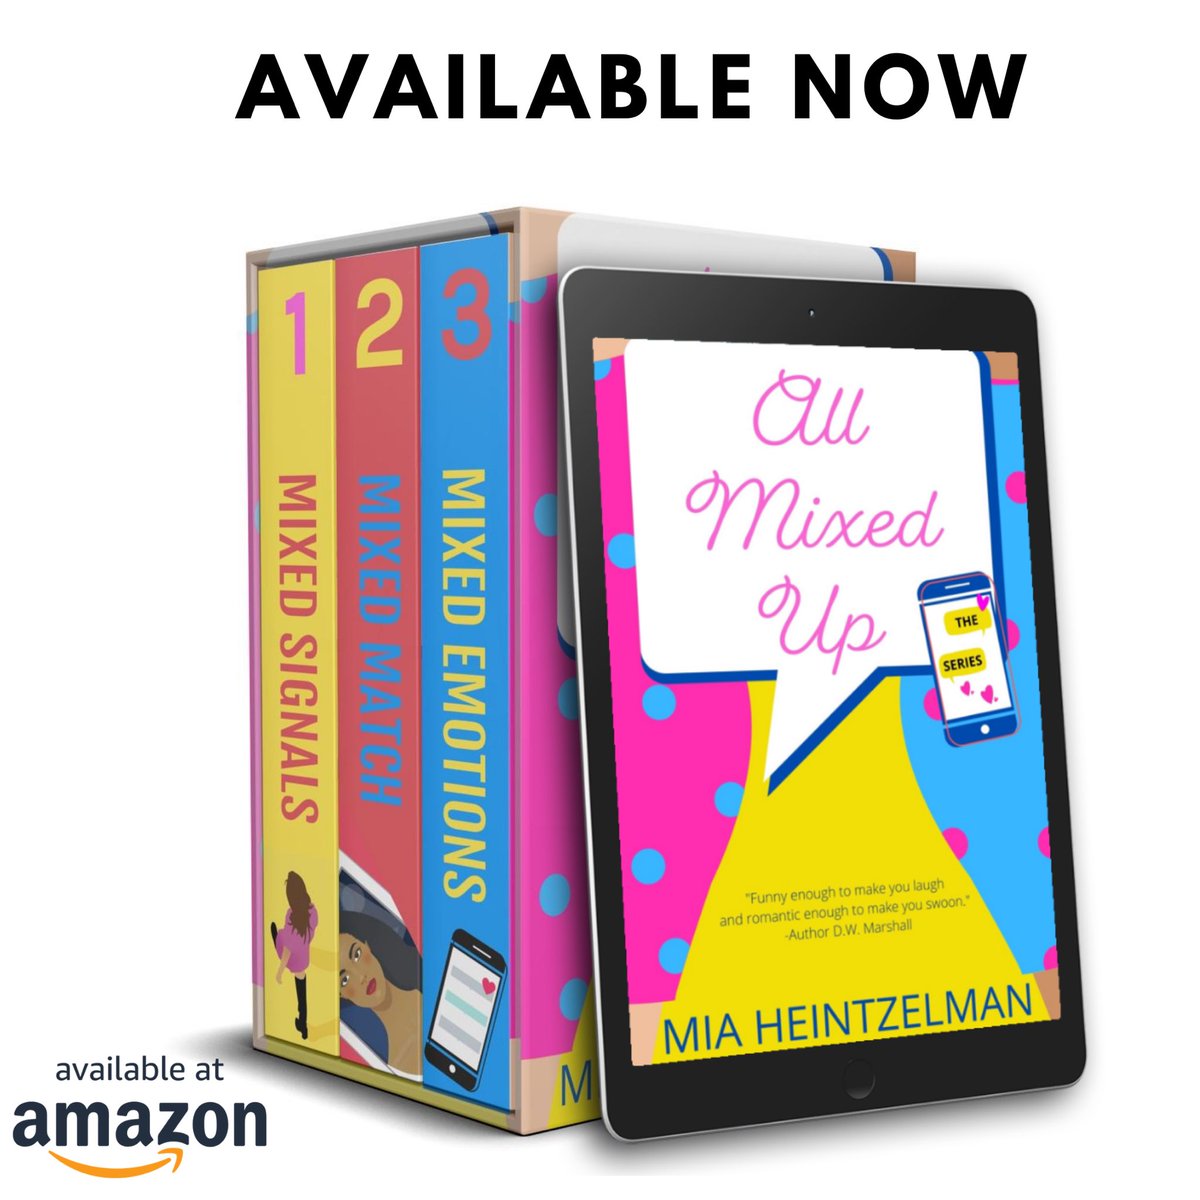 There’s nothing better than three books wrapped up in one 💖The All Mixed Up Series boxset is available now. I love this collection. 

#allmixedupseries #allmixedupcollection #romanceboxset #romancereads #roommatestolovers #instalove #brothersbestfriend #enemiestolovers